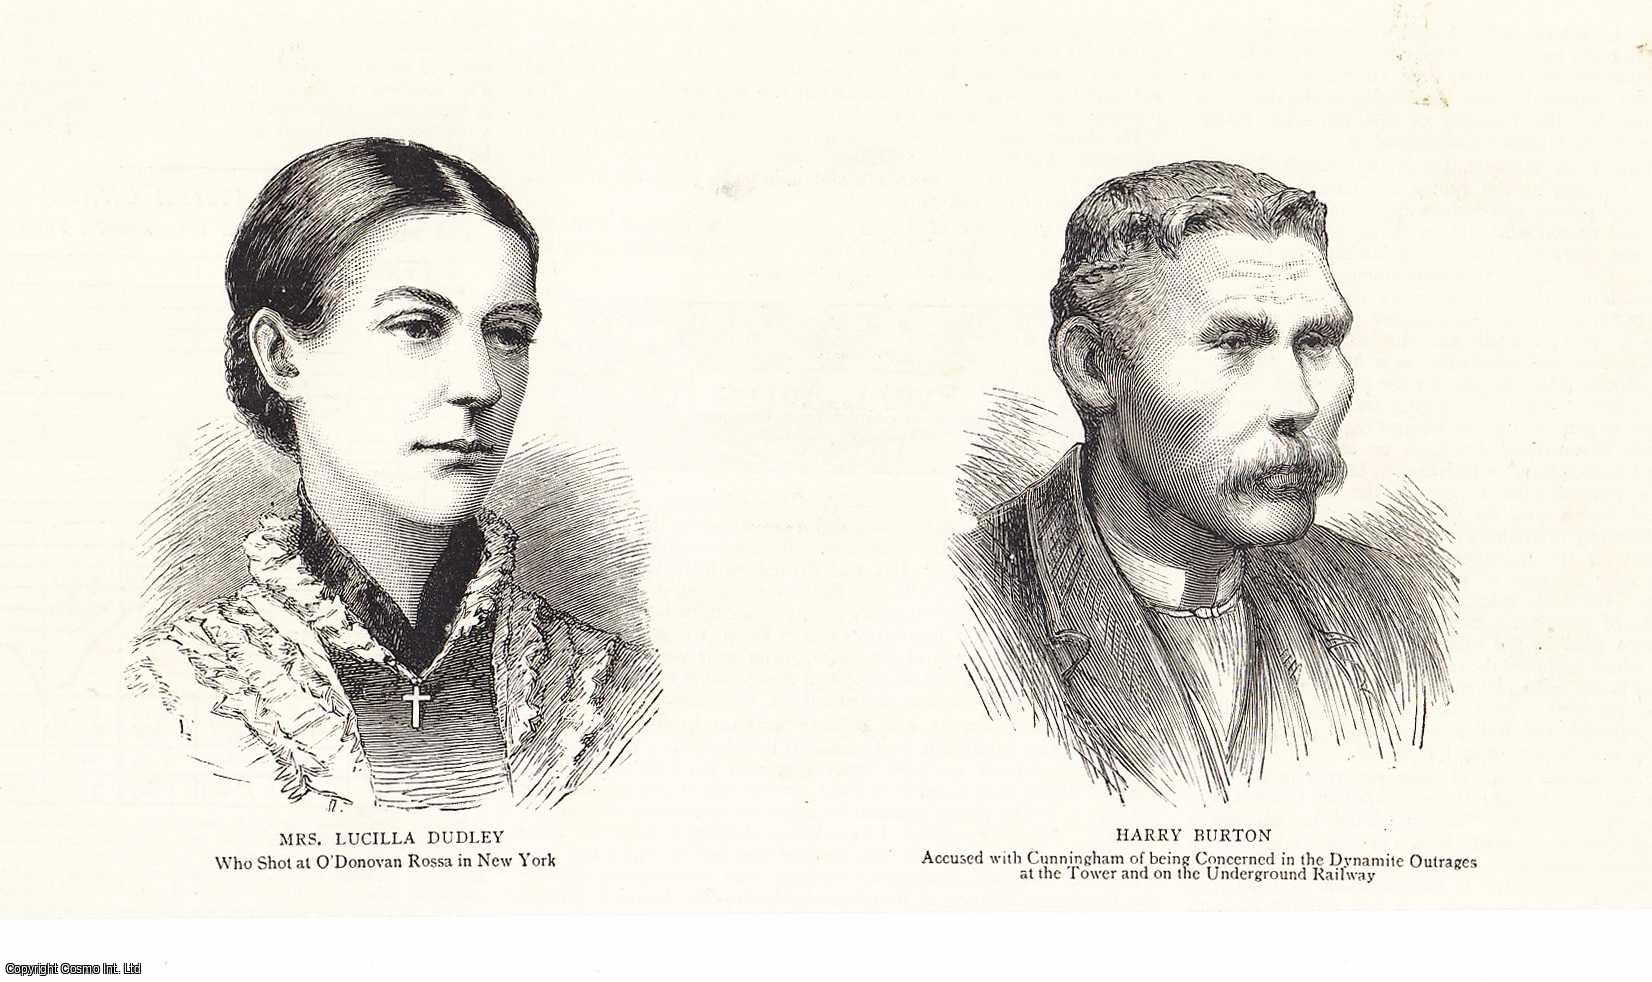 Fenian Dynamite Outrages, London - Vignettes of Mrs Lucilla Dudley (O'Donovan Rossa's Assailant) and Harry Burton, Accused of Dynamite Outrages on the Tower of London. An original print from the Graphic Illustrated Weekly Magazine, 1885.